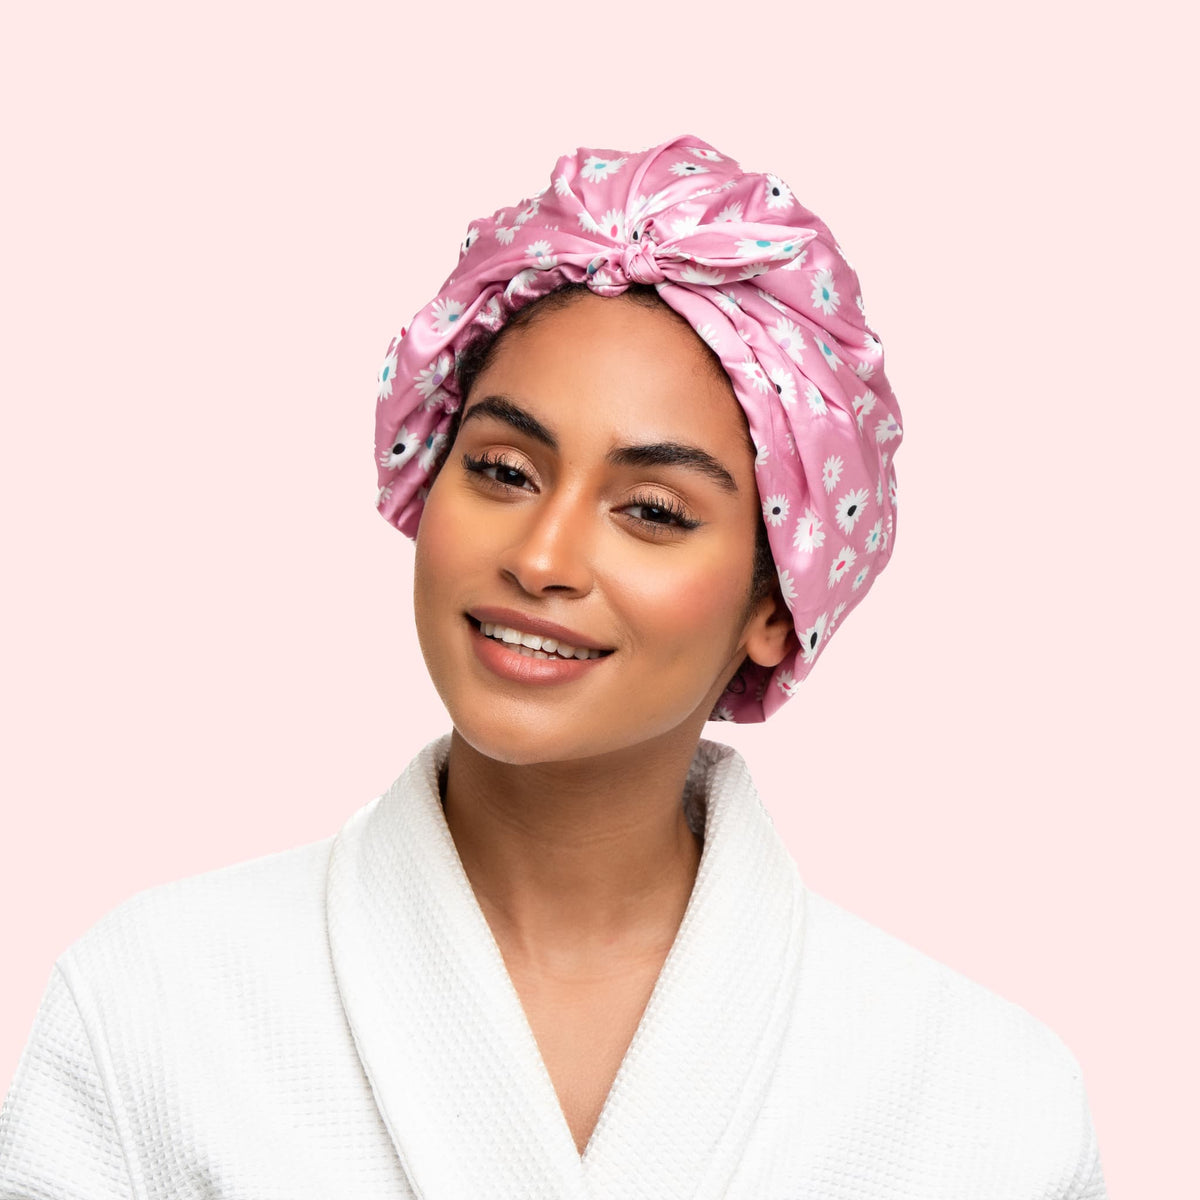 Only Curls Shower Cap - Dusty Pink Daisy - Only Curls